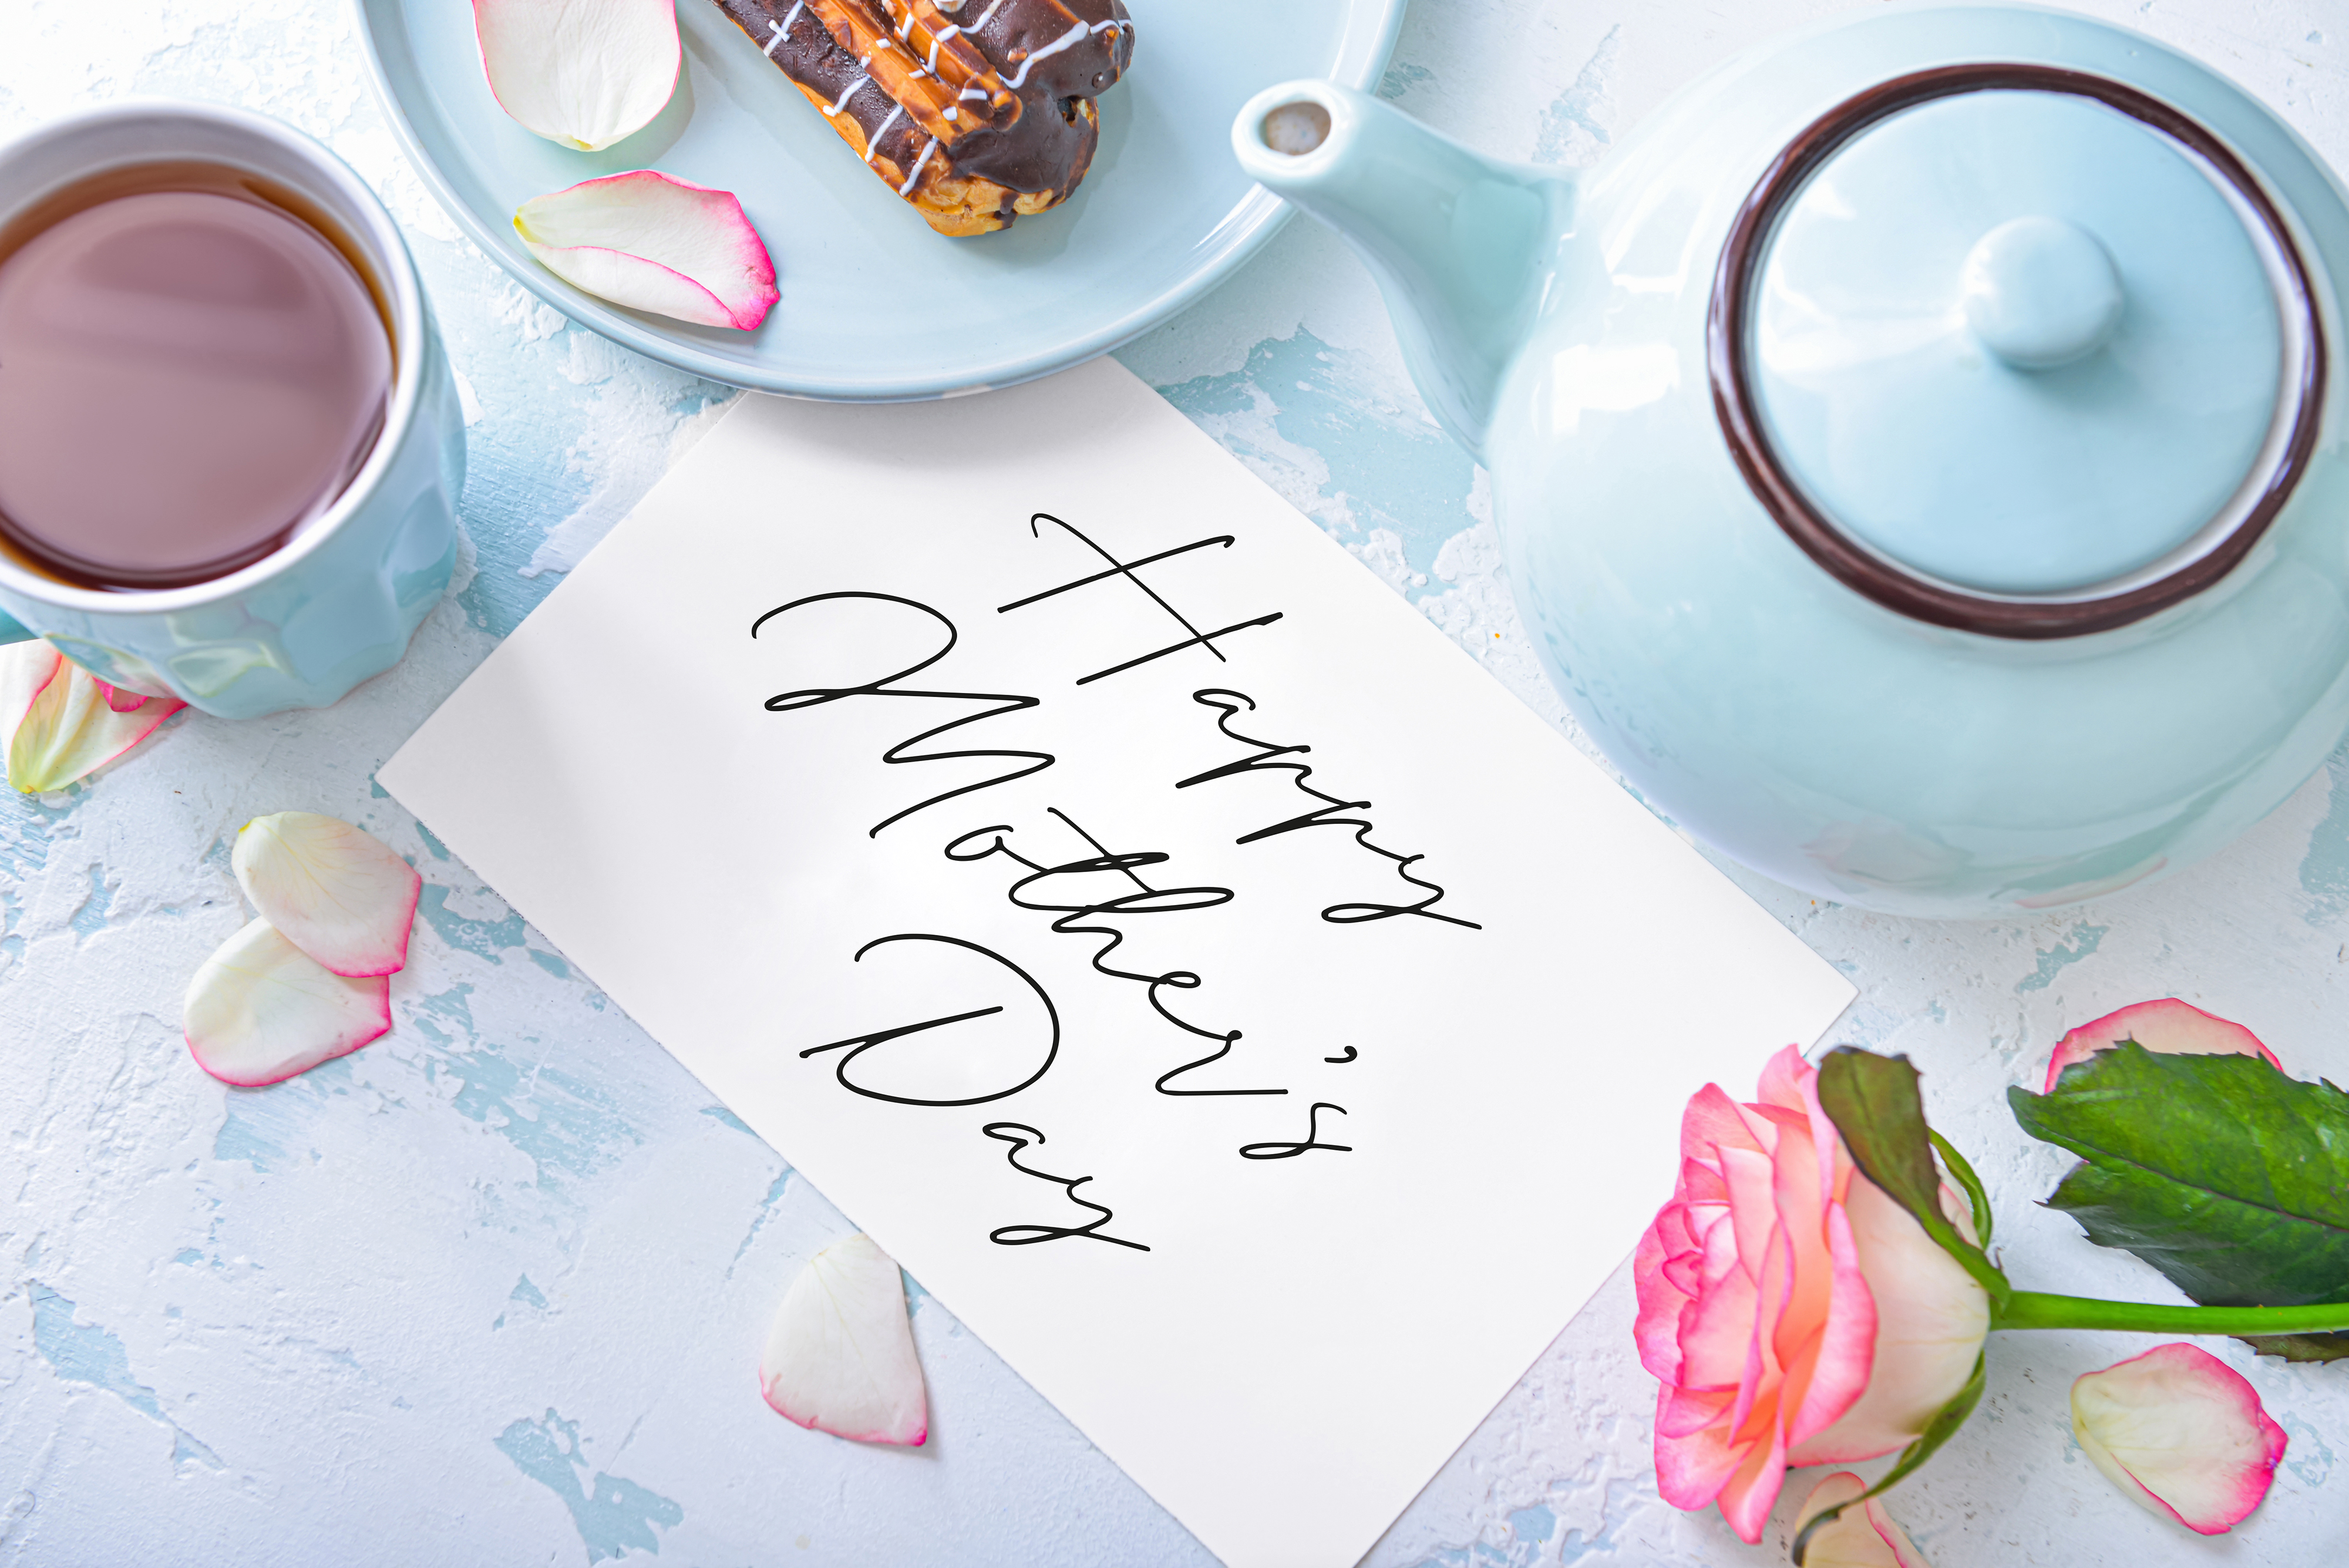 Enjoy a Breakfast at Tiffany's themed Mother's Day Brunch on Sunday, April 14, 2023 in GRANA at The Langham, Boston